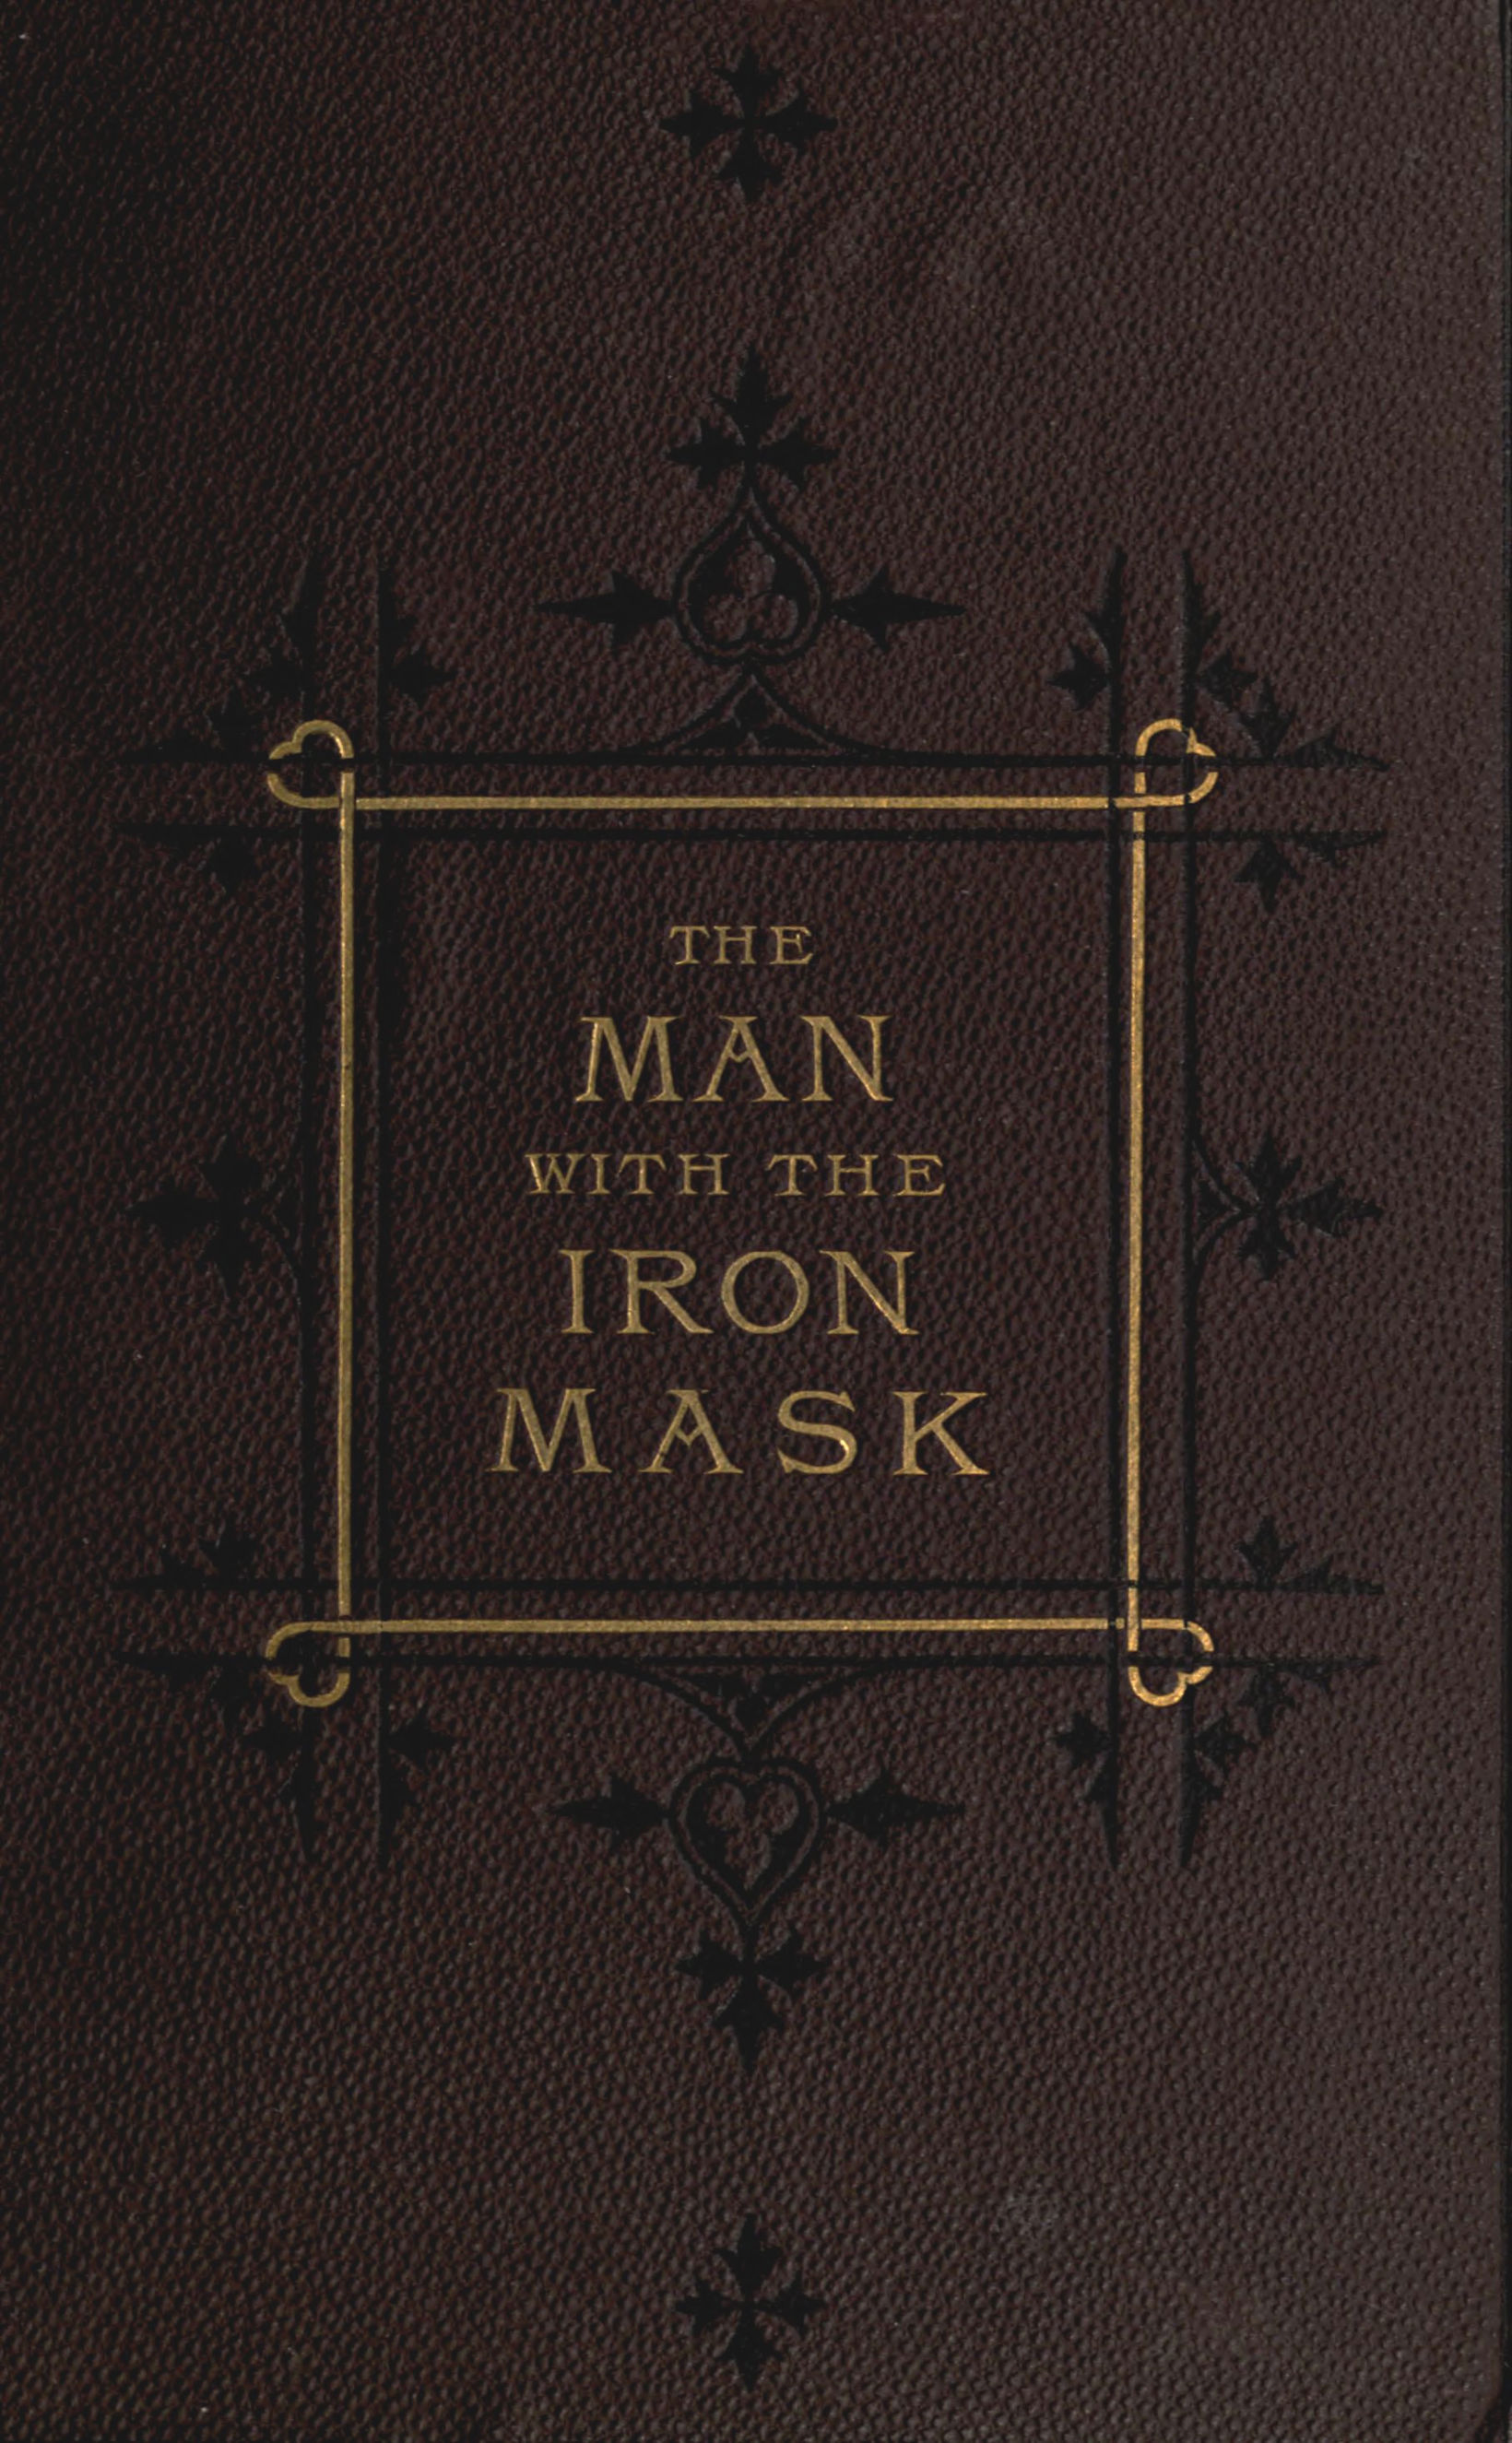 The man with the iron mask